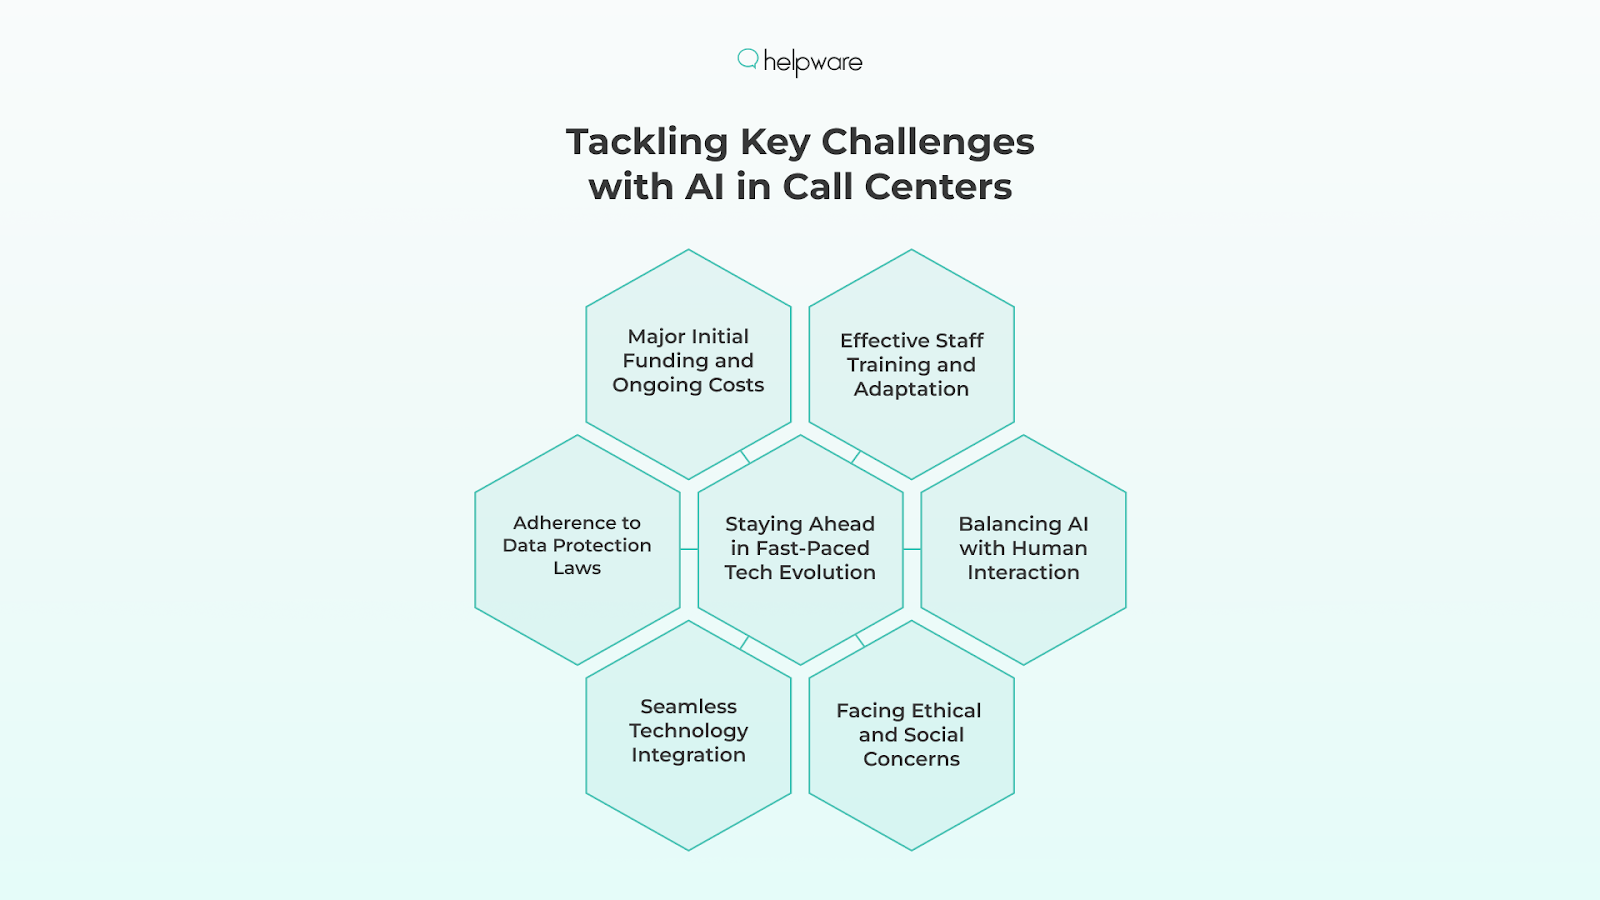 Key Challenges with AI in Call Centers